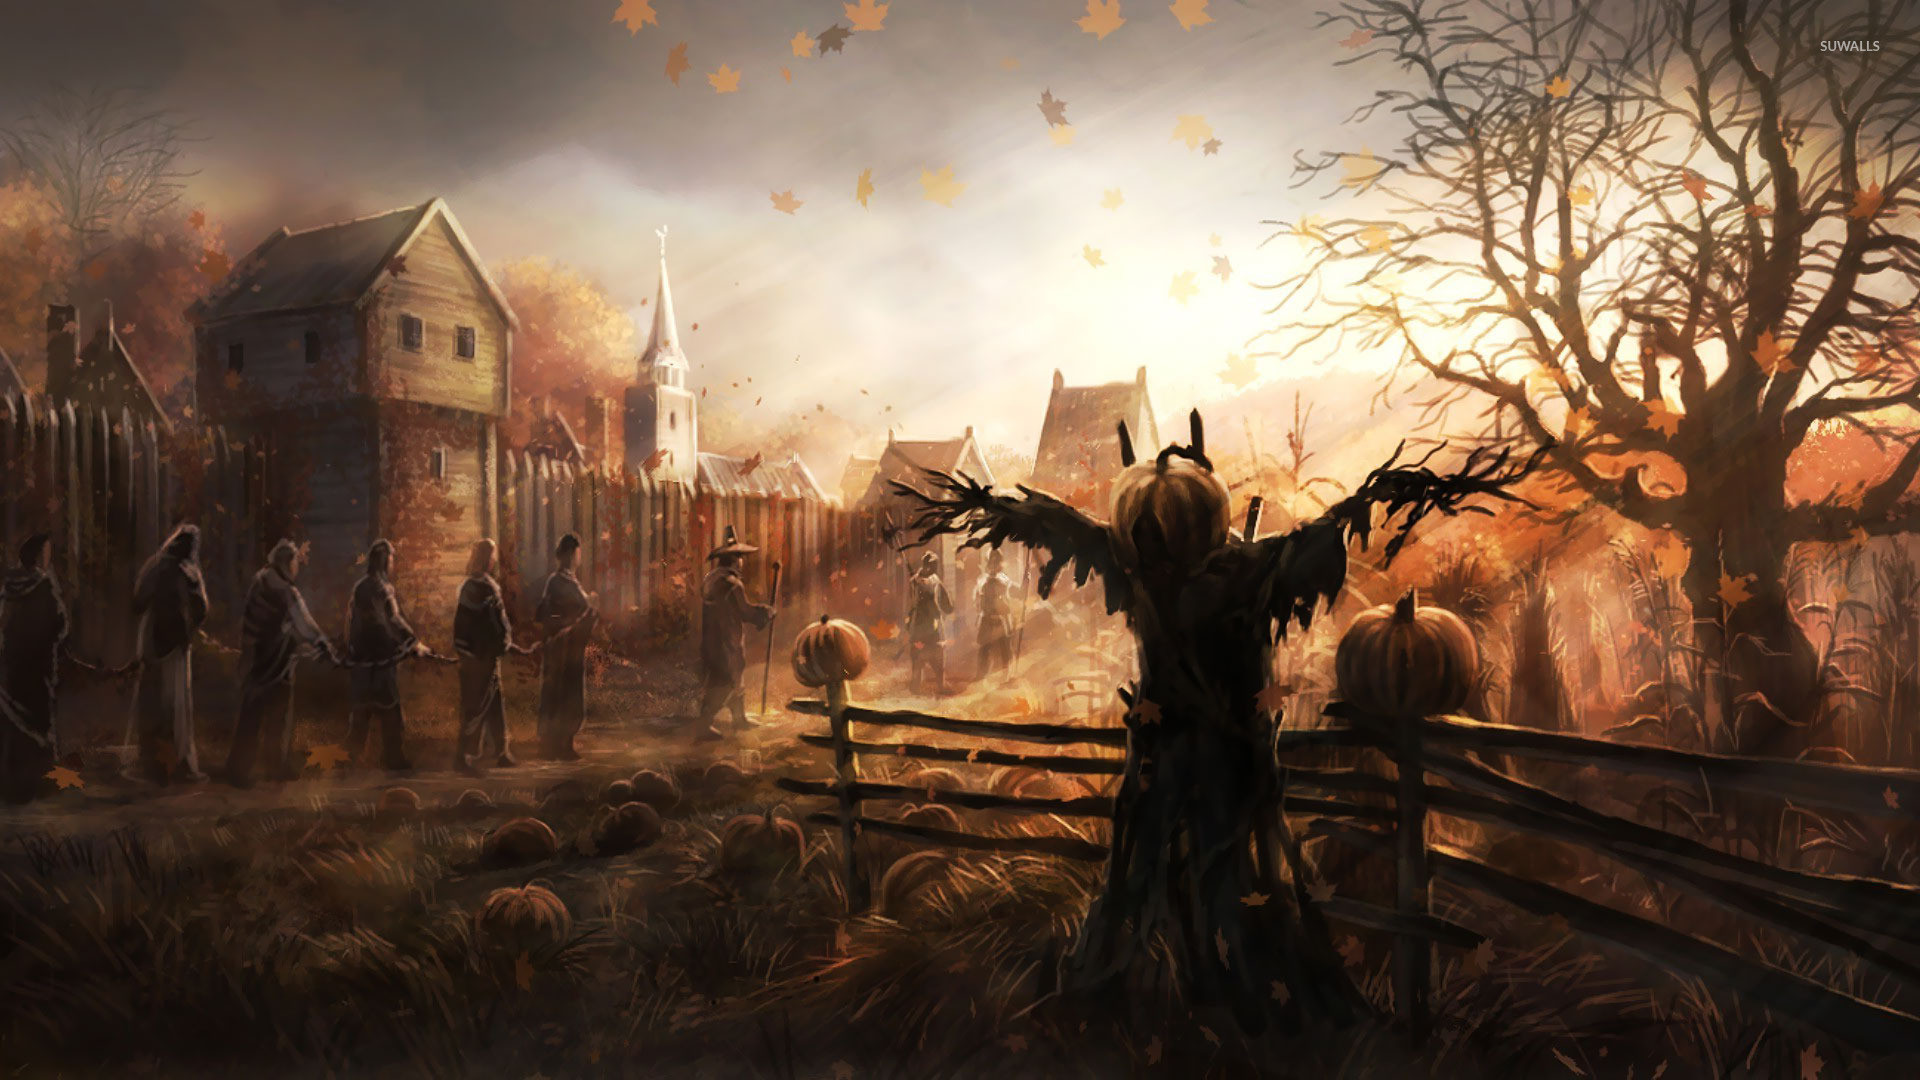 1920x1080 Chained slaves walking past the scarecrow wallpaper